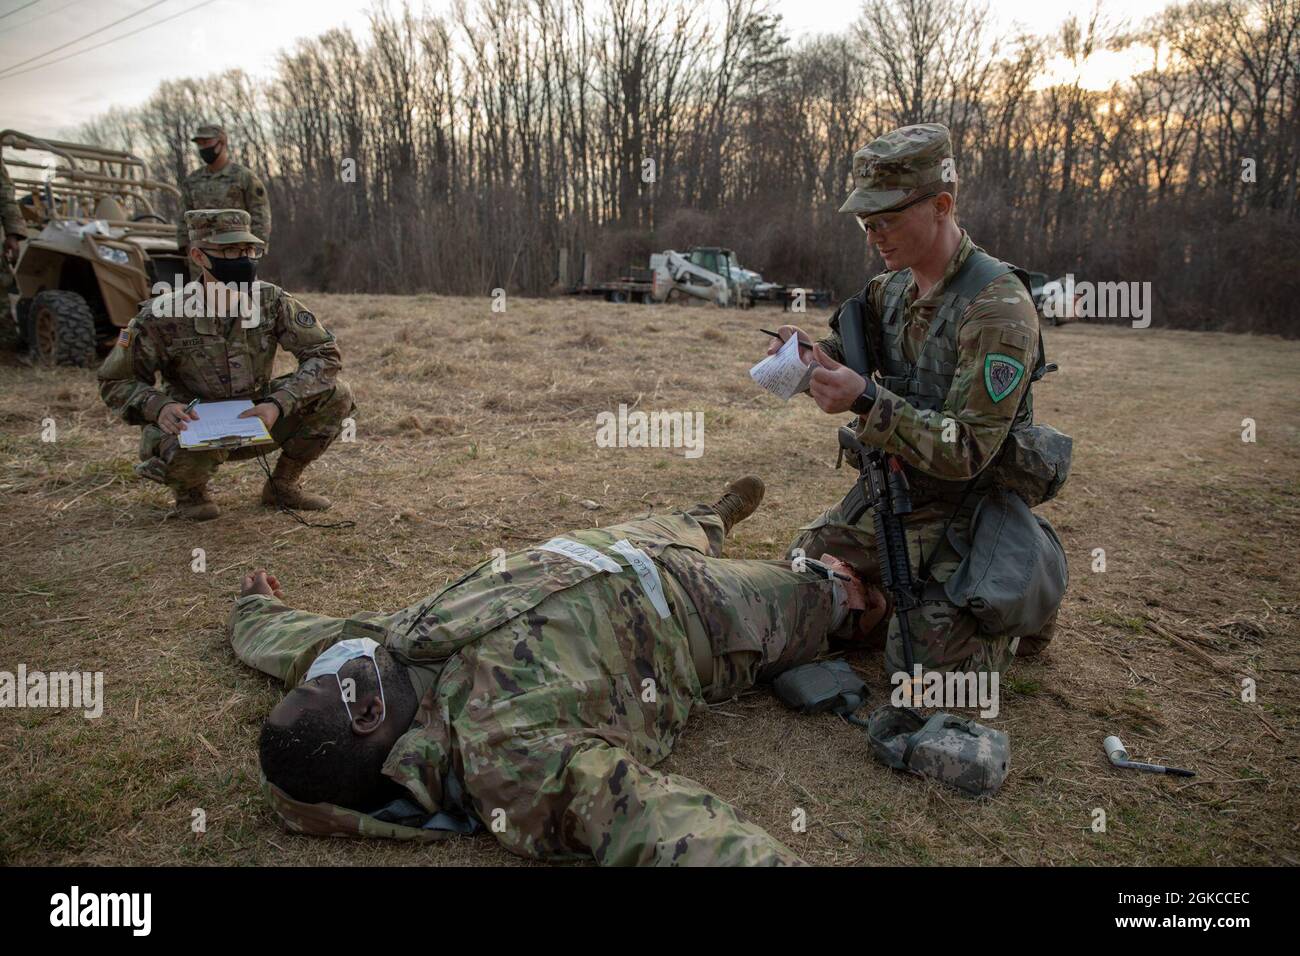 Sgt. Charles Hellmann, a military police with the 200th Military Police Company, provides medical aid to a mock casualty, during the 2021 Maryland Best Warrior Competition at H Steven Blum Military Reservation in Glen Arm, Maryland, on March 11, 2021. The competition is a multi-day marathon of mental and physical trials, pushing these elite Service members to their limits. This year’s competition took place from March 11-14. Extensive sanitary safety precautions made sure the competitors could safely display the best of their skills. Stock Photo